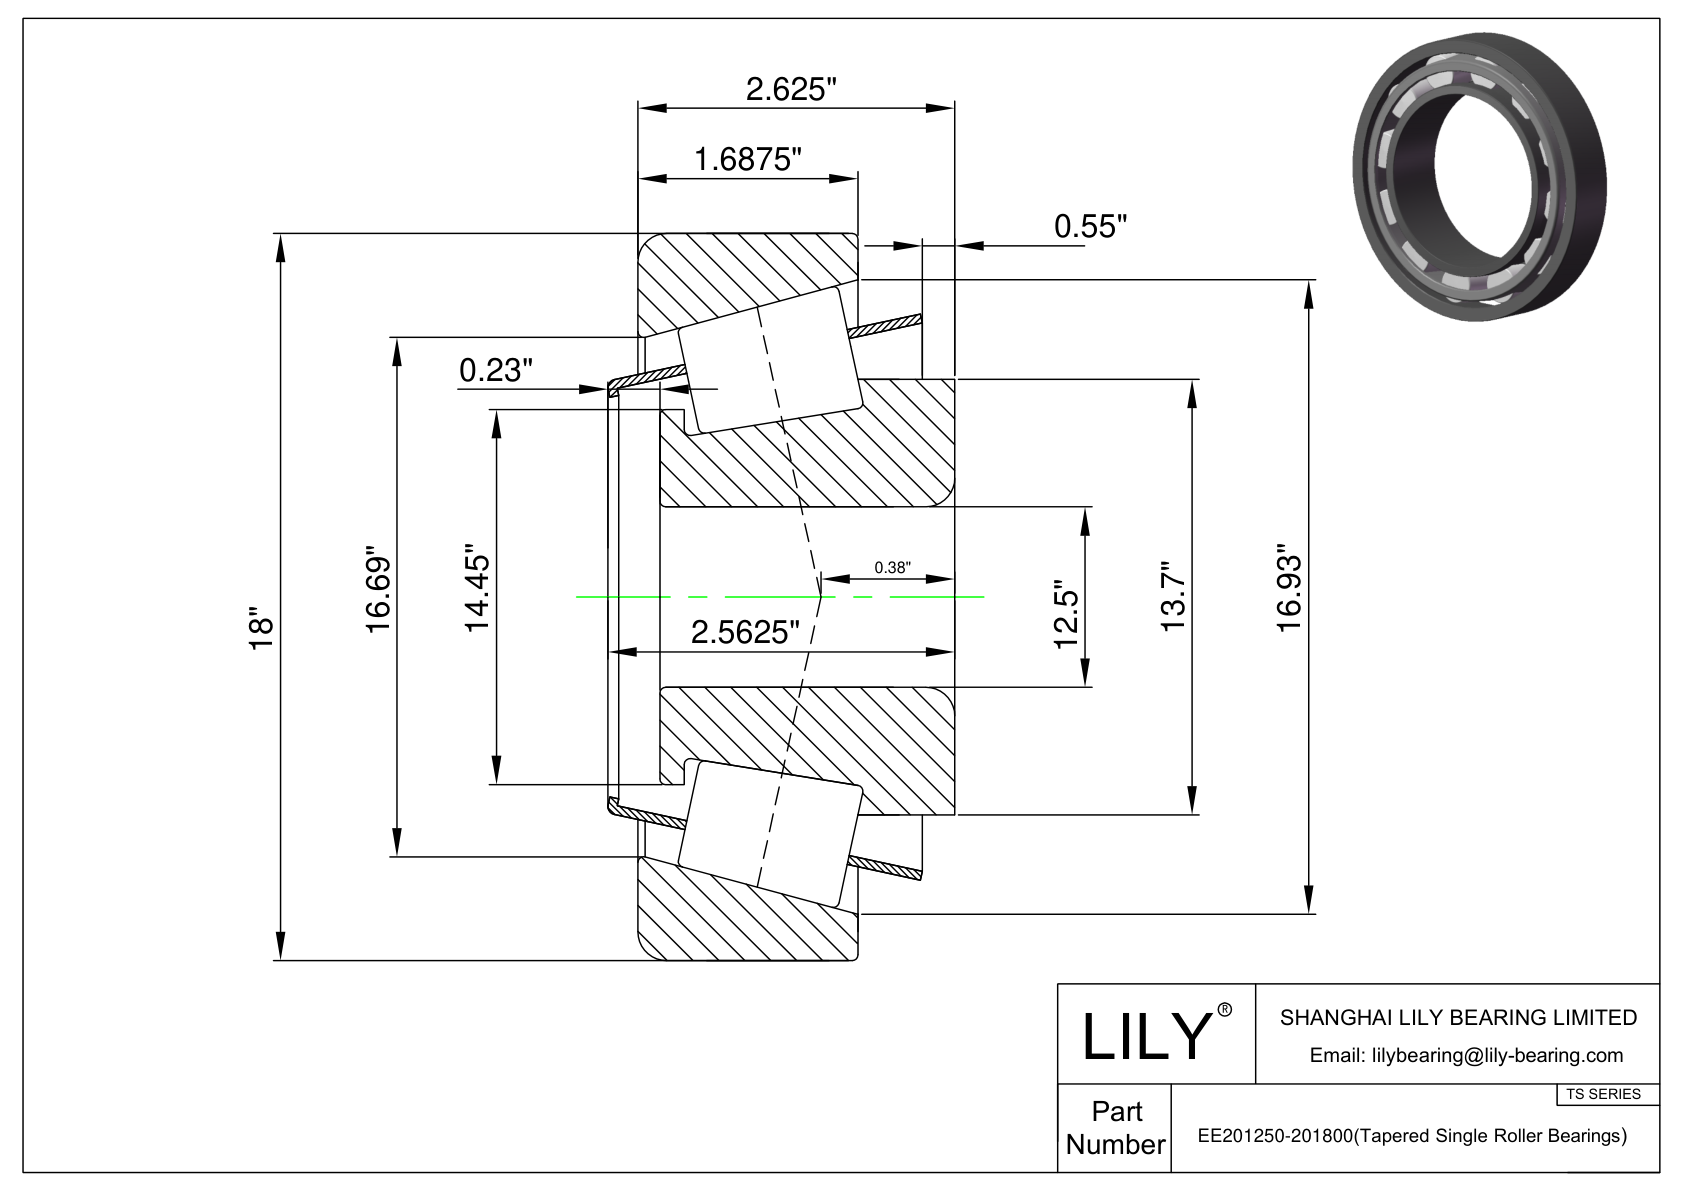 EE201250-201800 TS (Tapered Single Roller Bearings) (Imperial) cad drawing